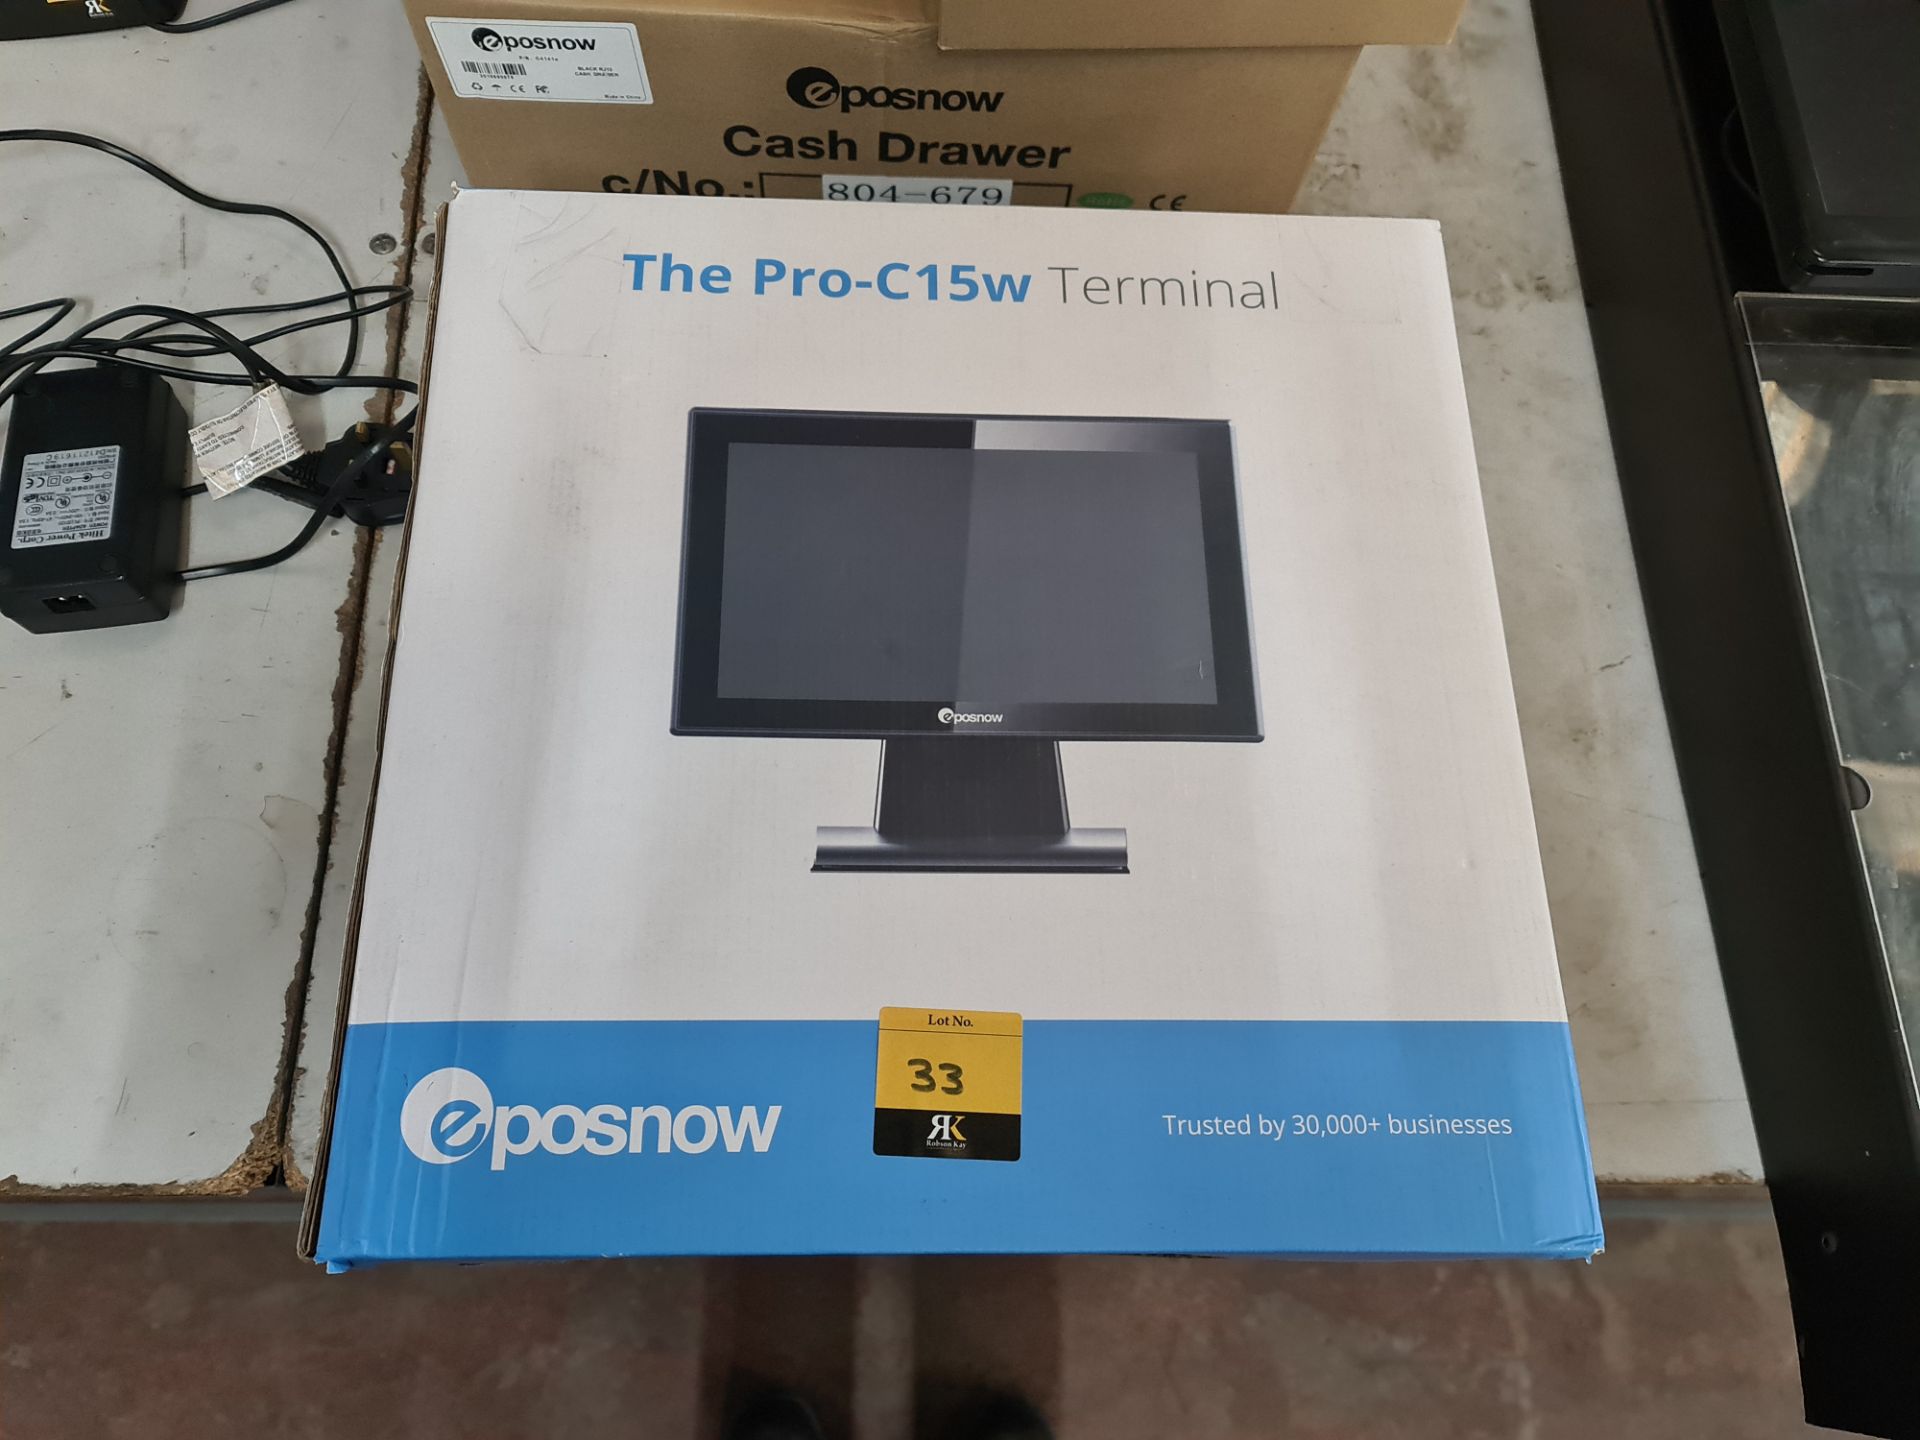 Eposnow model Pro-C15W EPOS terminal - includes box but we are uncertain if this item is new/unused